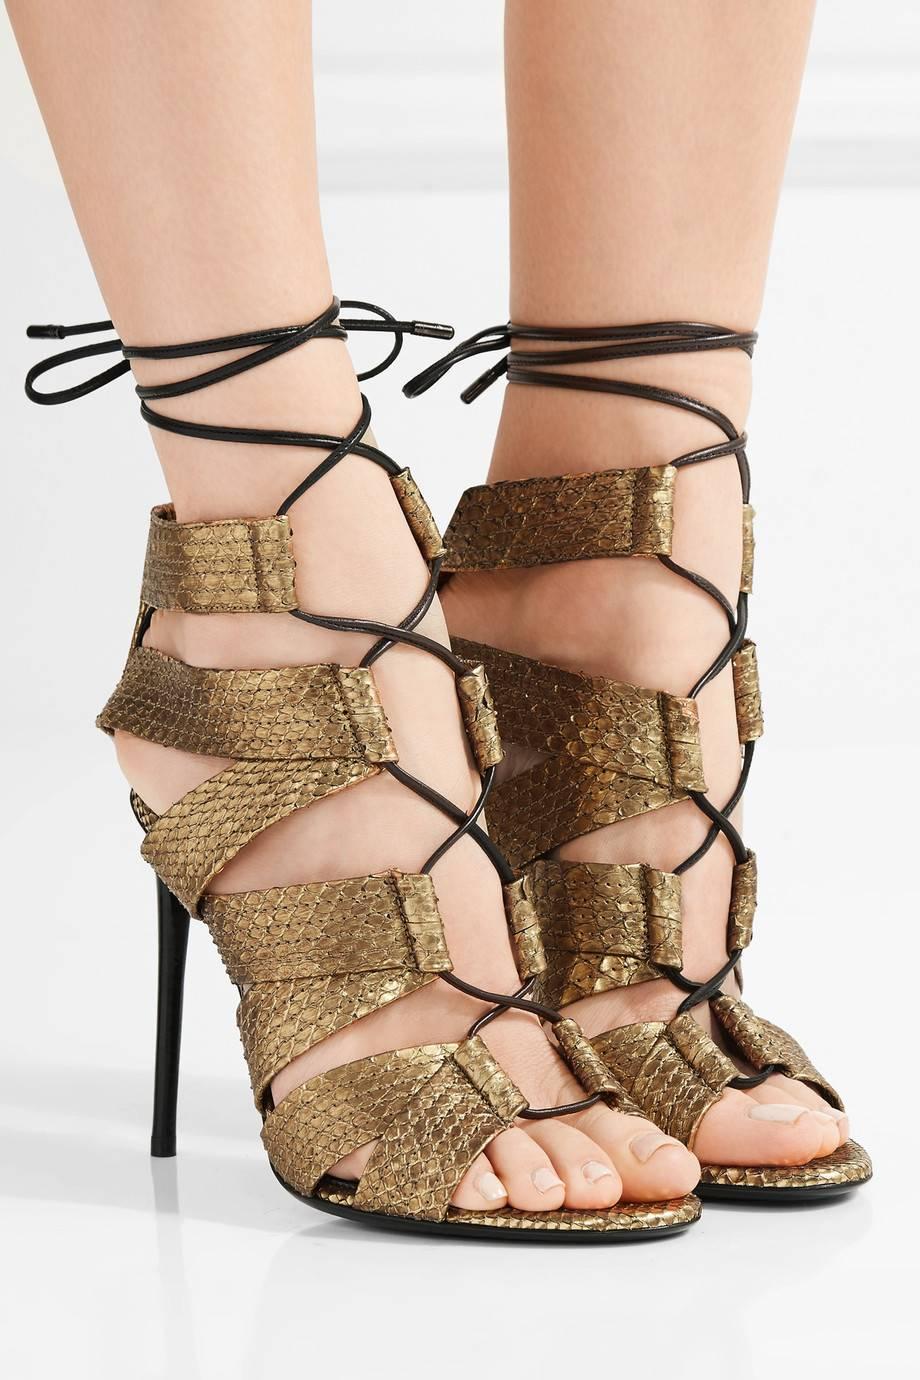 CURATOR'S NOTES

LAST PAIR! Tom Ford New Sold Out Bronze Snakeskin Cut Out Evening Sandals Heels in Box 

Original retail price $2,295
Size IT 36.5
Snakeskin (Python)
Ankle tie closure
Made in Italy
Heel height 4.15" (105mm)
Includes original